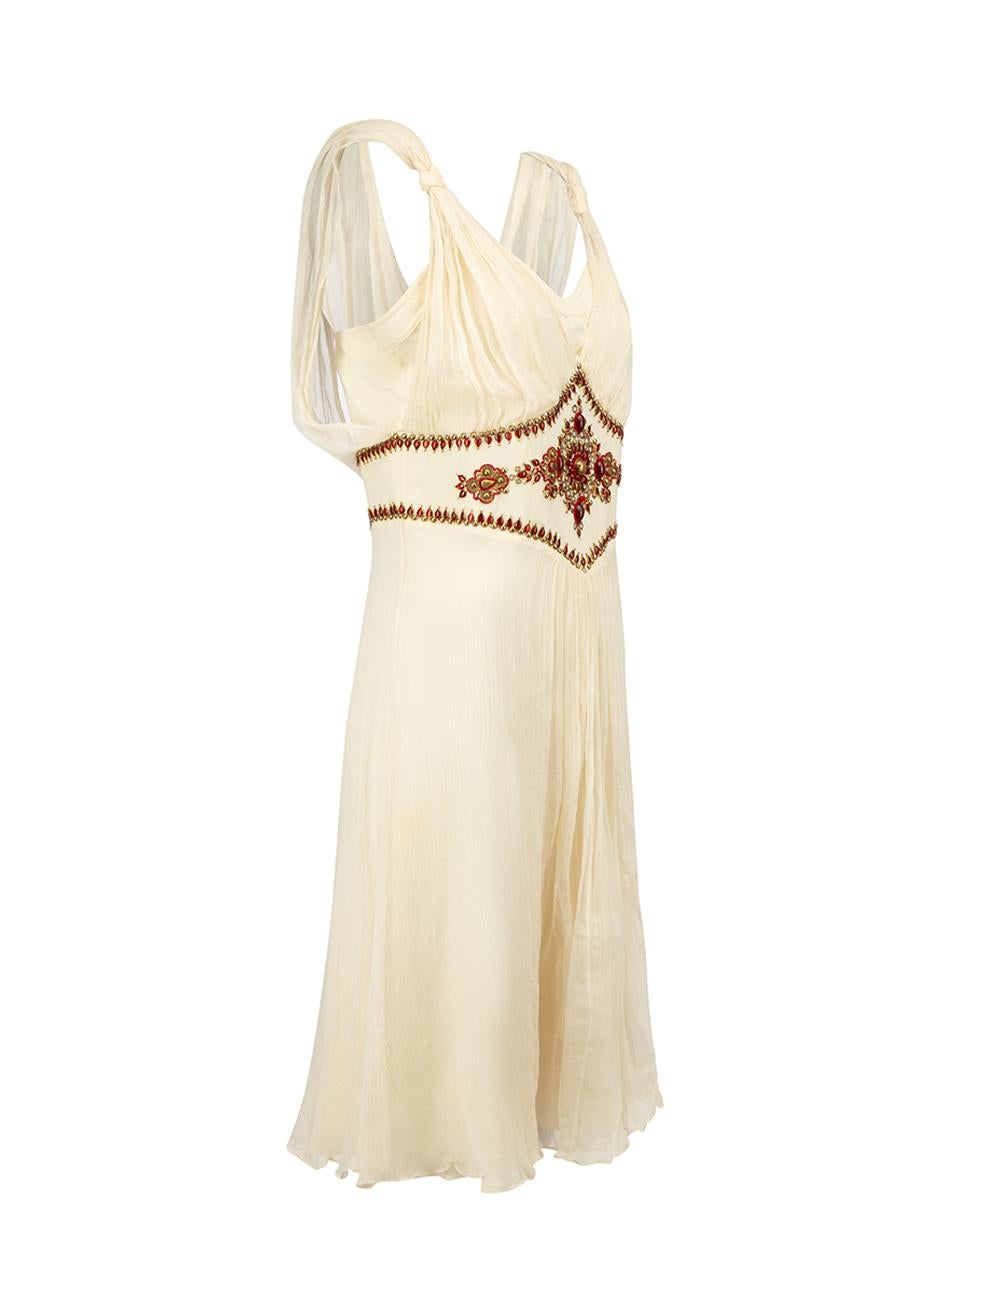 CONDITION is Good. General wear to dress is evident. Moderate signs of discolouration at under arm and right side of dress on this used Temperley designer resale item.



Details


Cream

Silk

Mini dress

Red and gold bead